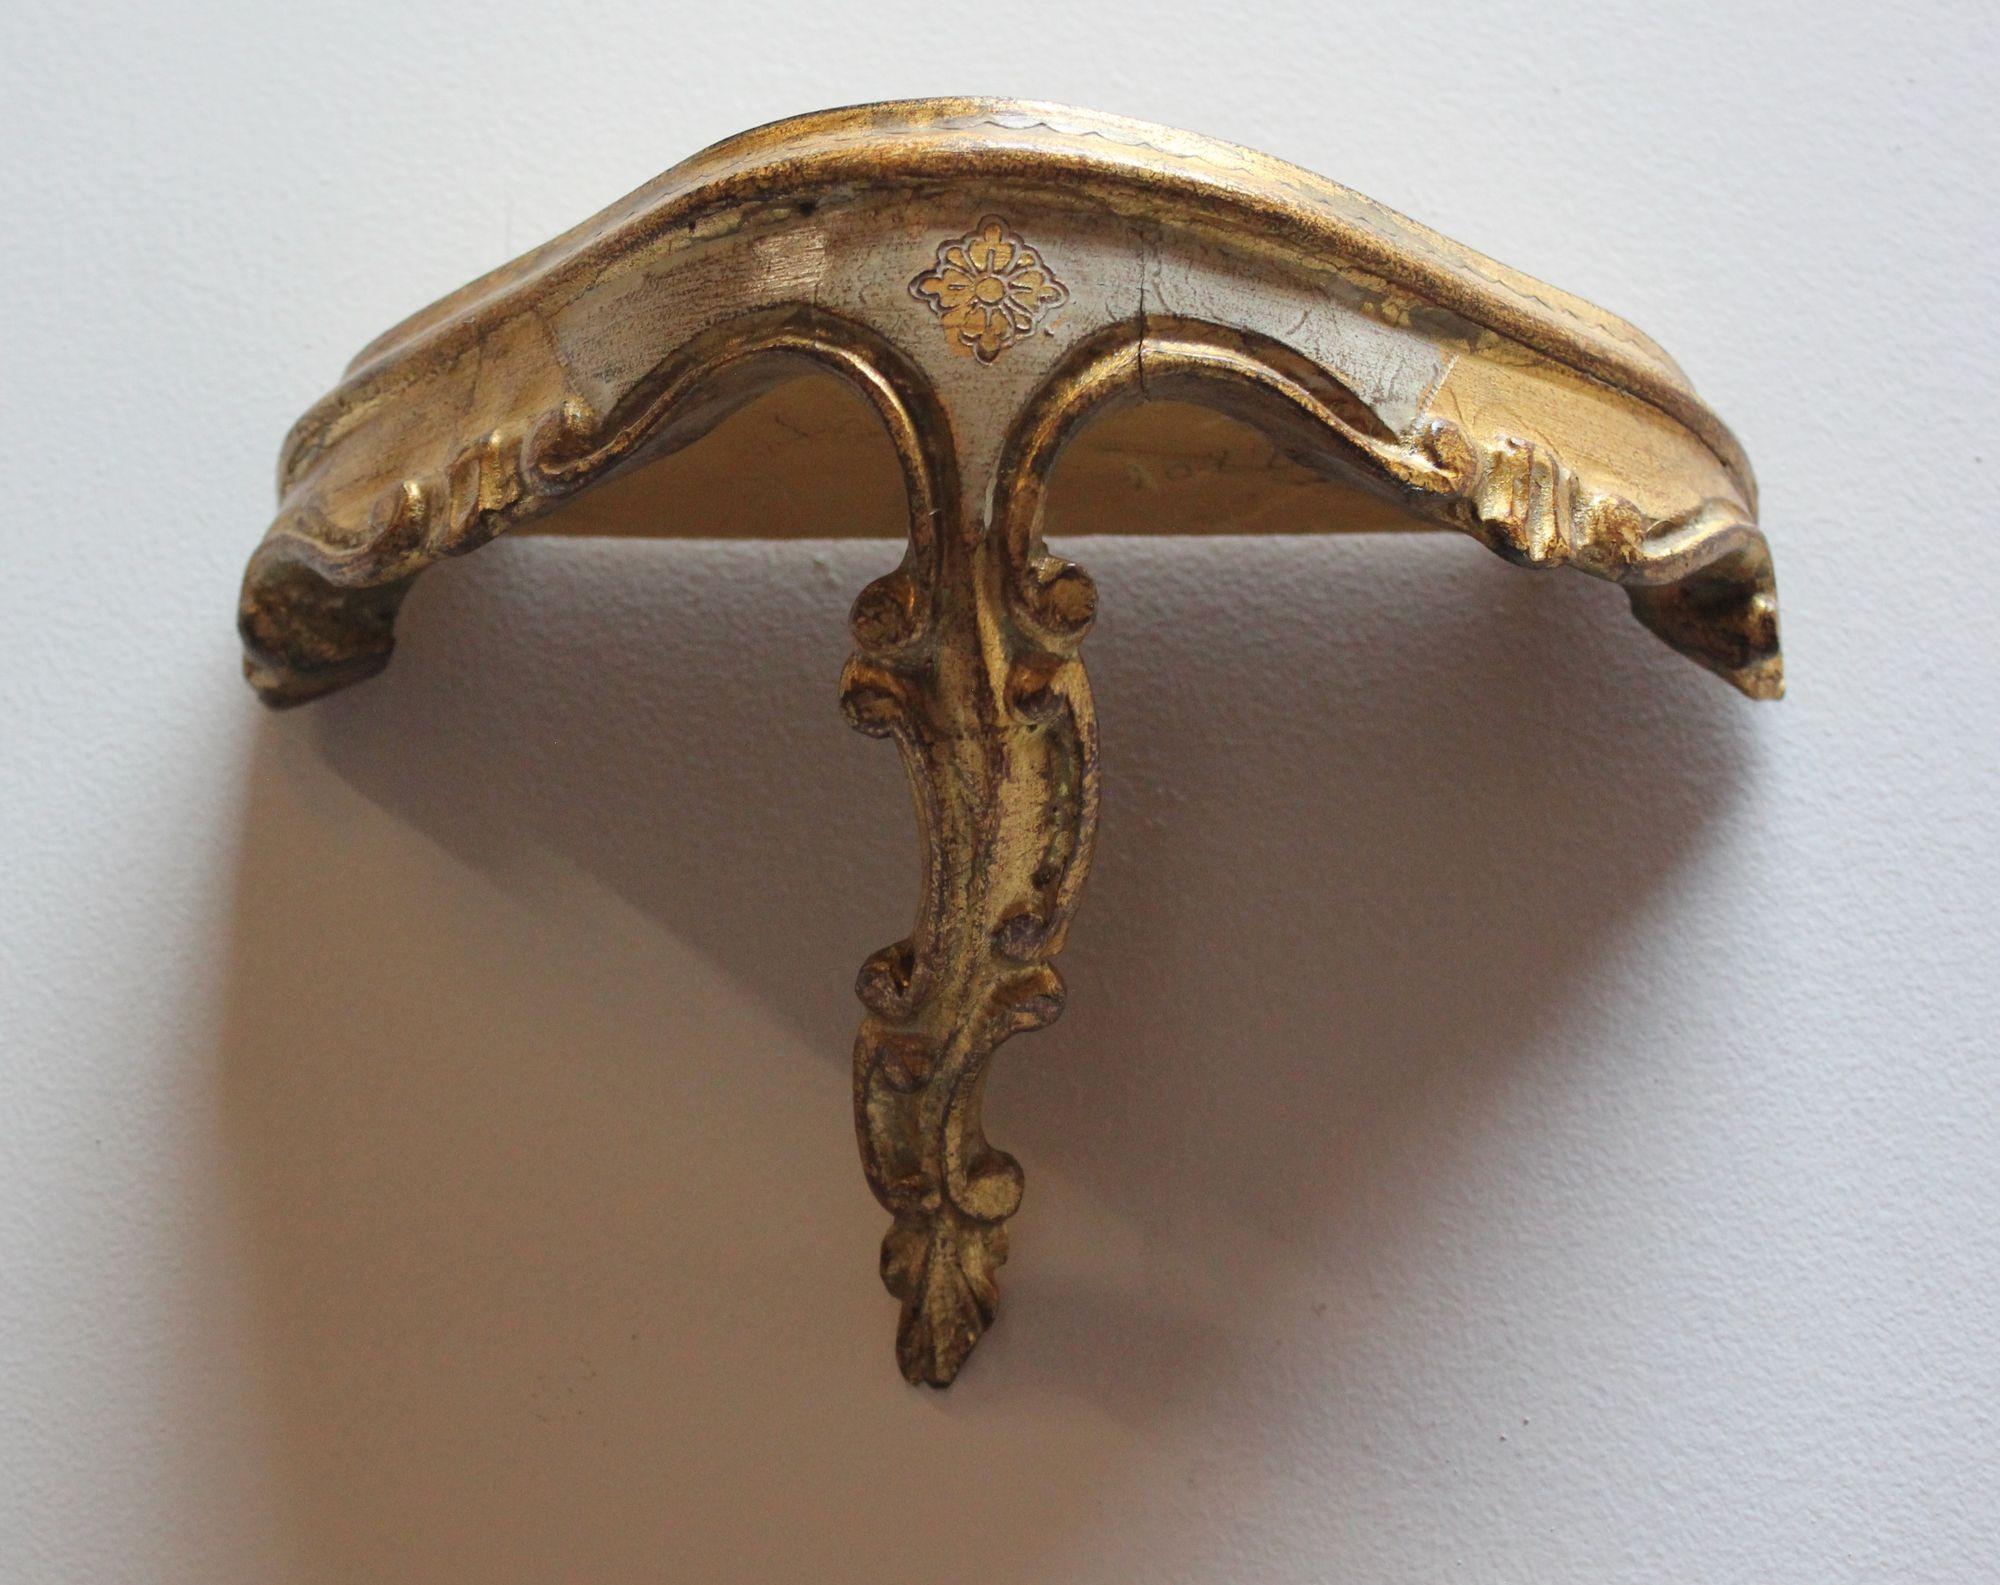 Pair of Vintage Florentine Giltwood Wall Brackets/Shelves with Rocaille Flourish For Sale 4